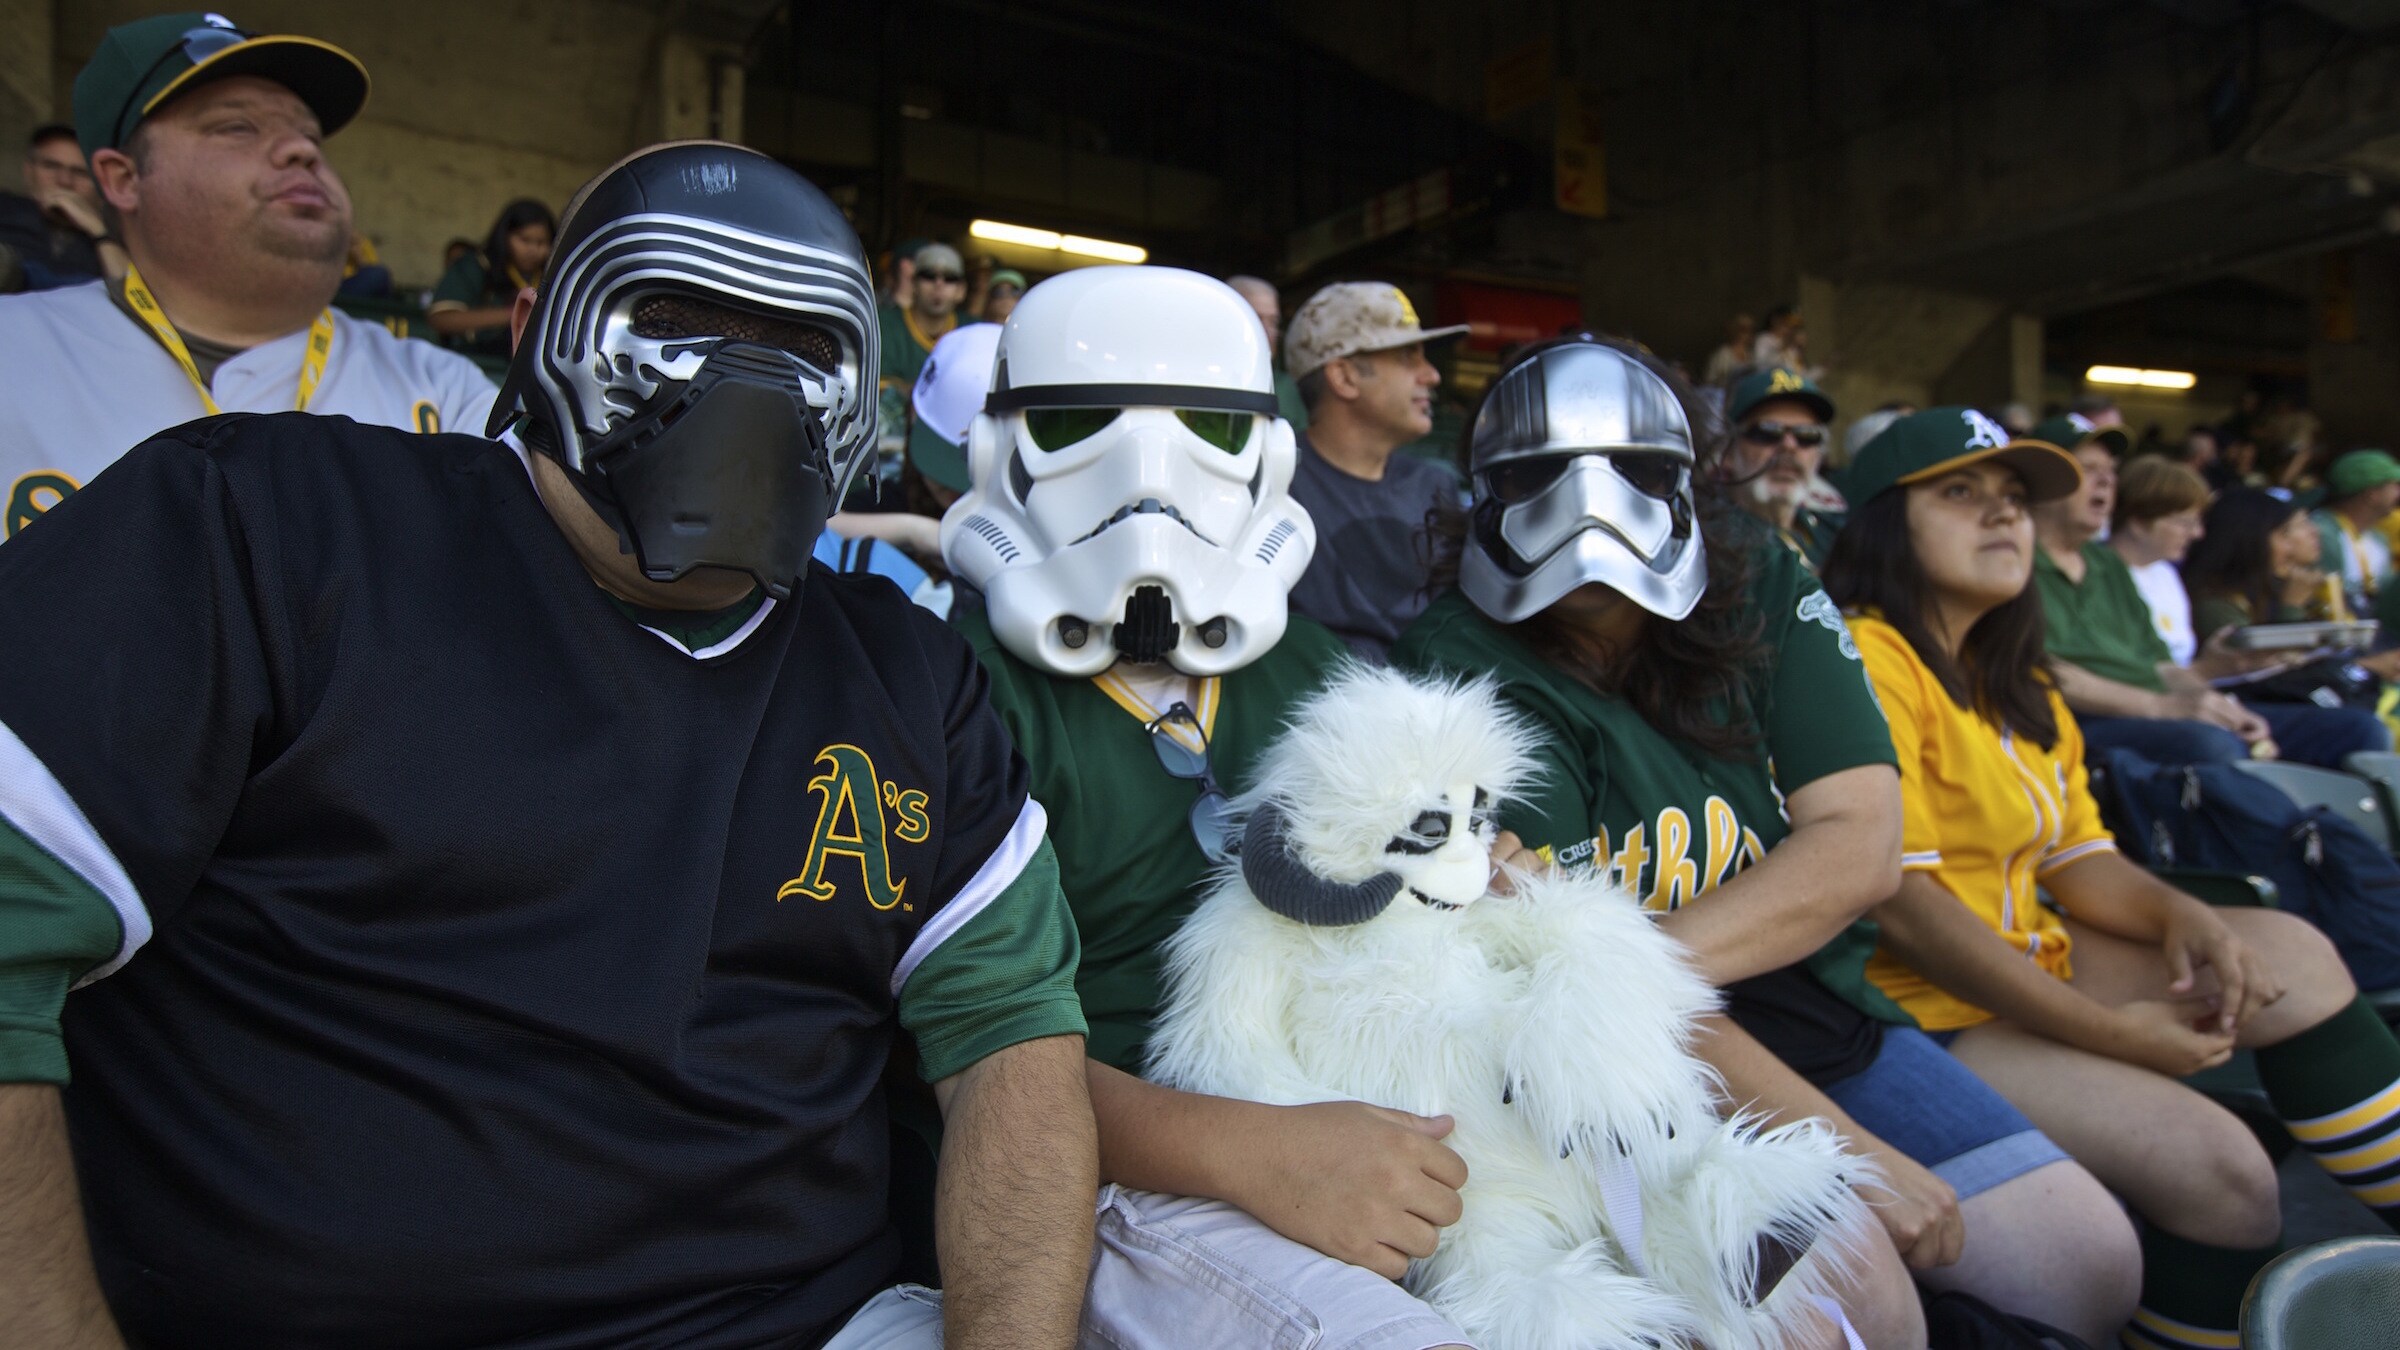 Blasters, Bounty Hunters, and Baseball: Star Wars Fireworks Night with the Oakland Athletics